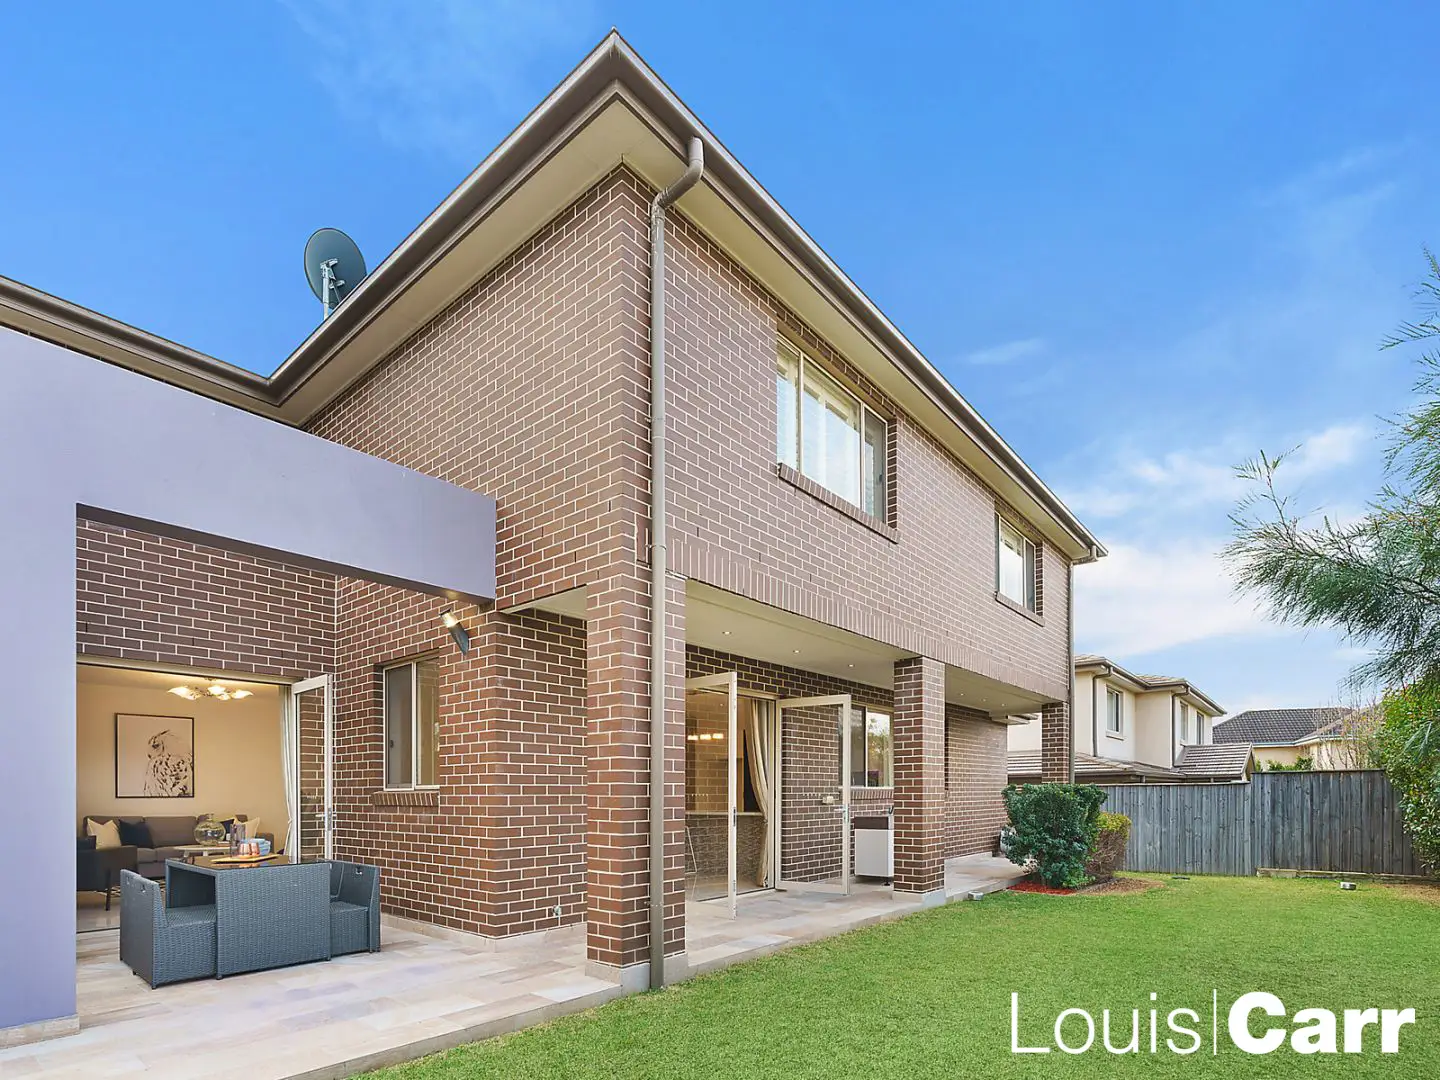 Photo #9: 22 Blundell Circuit, Kellyville - Sold by Louis Carr Real Estate